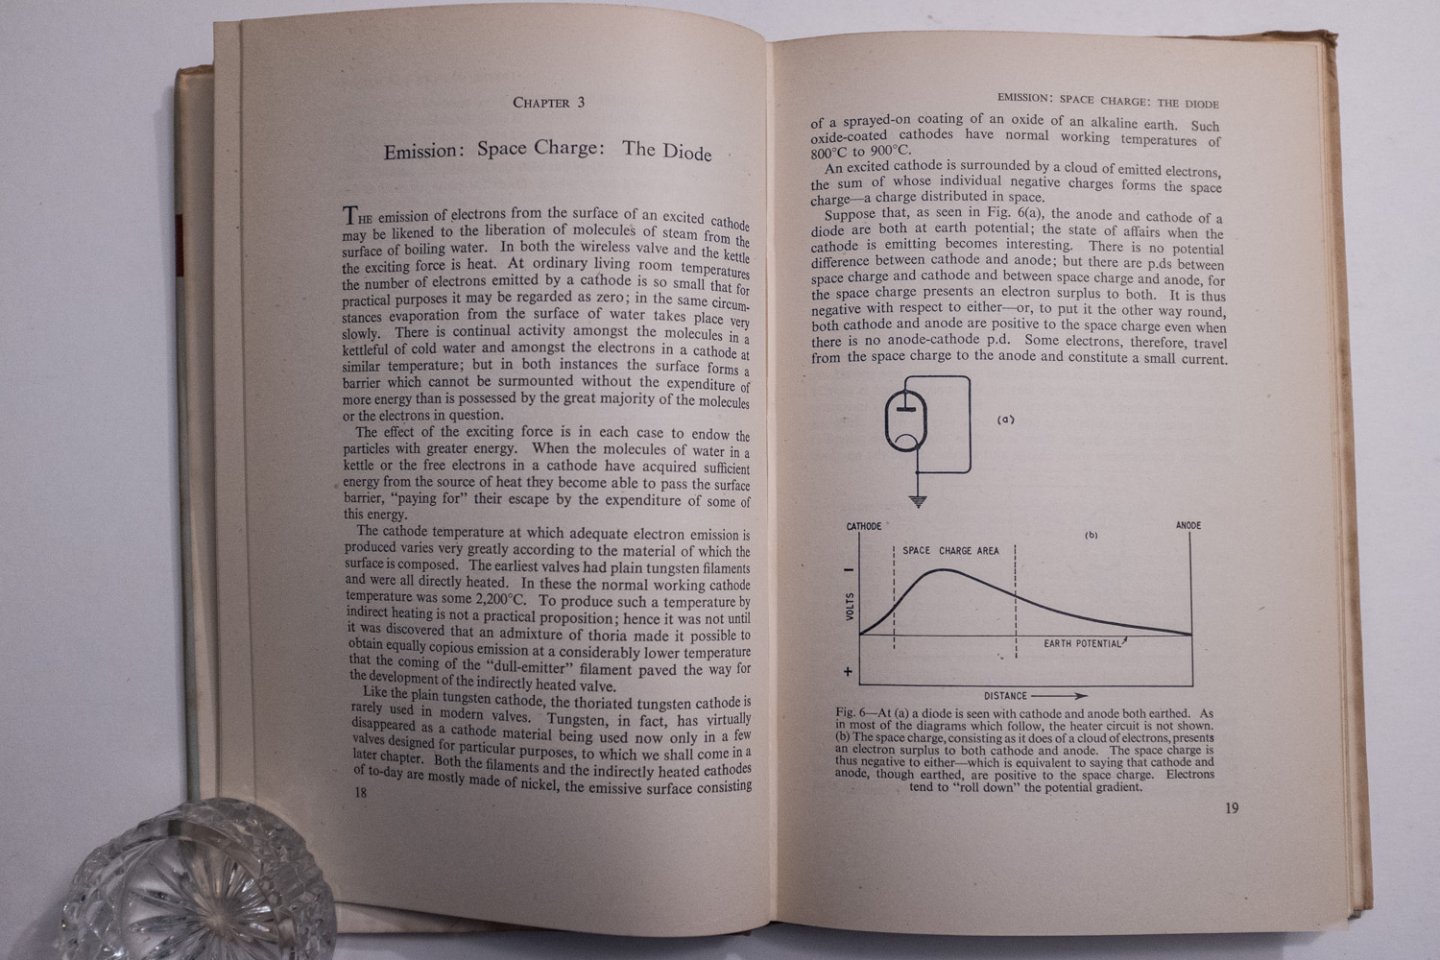 Hallows, R.W. - Introduction to valves by R.W. Hallows and H.K. Milward